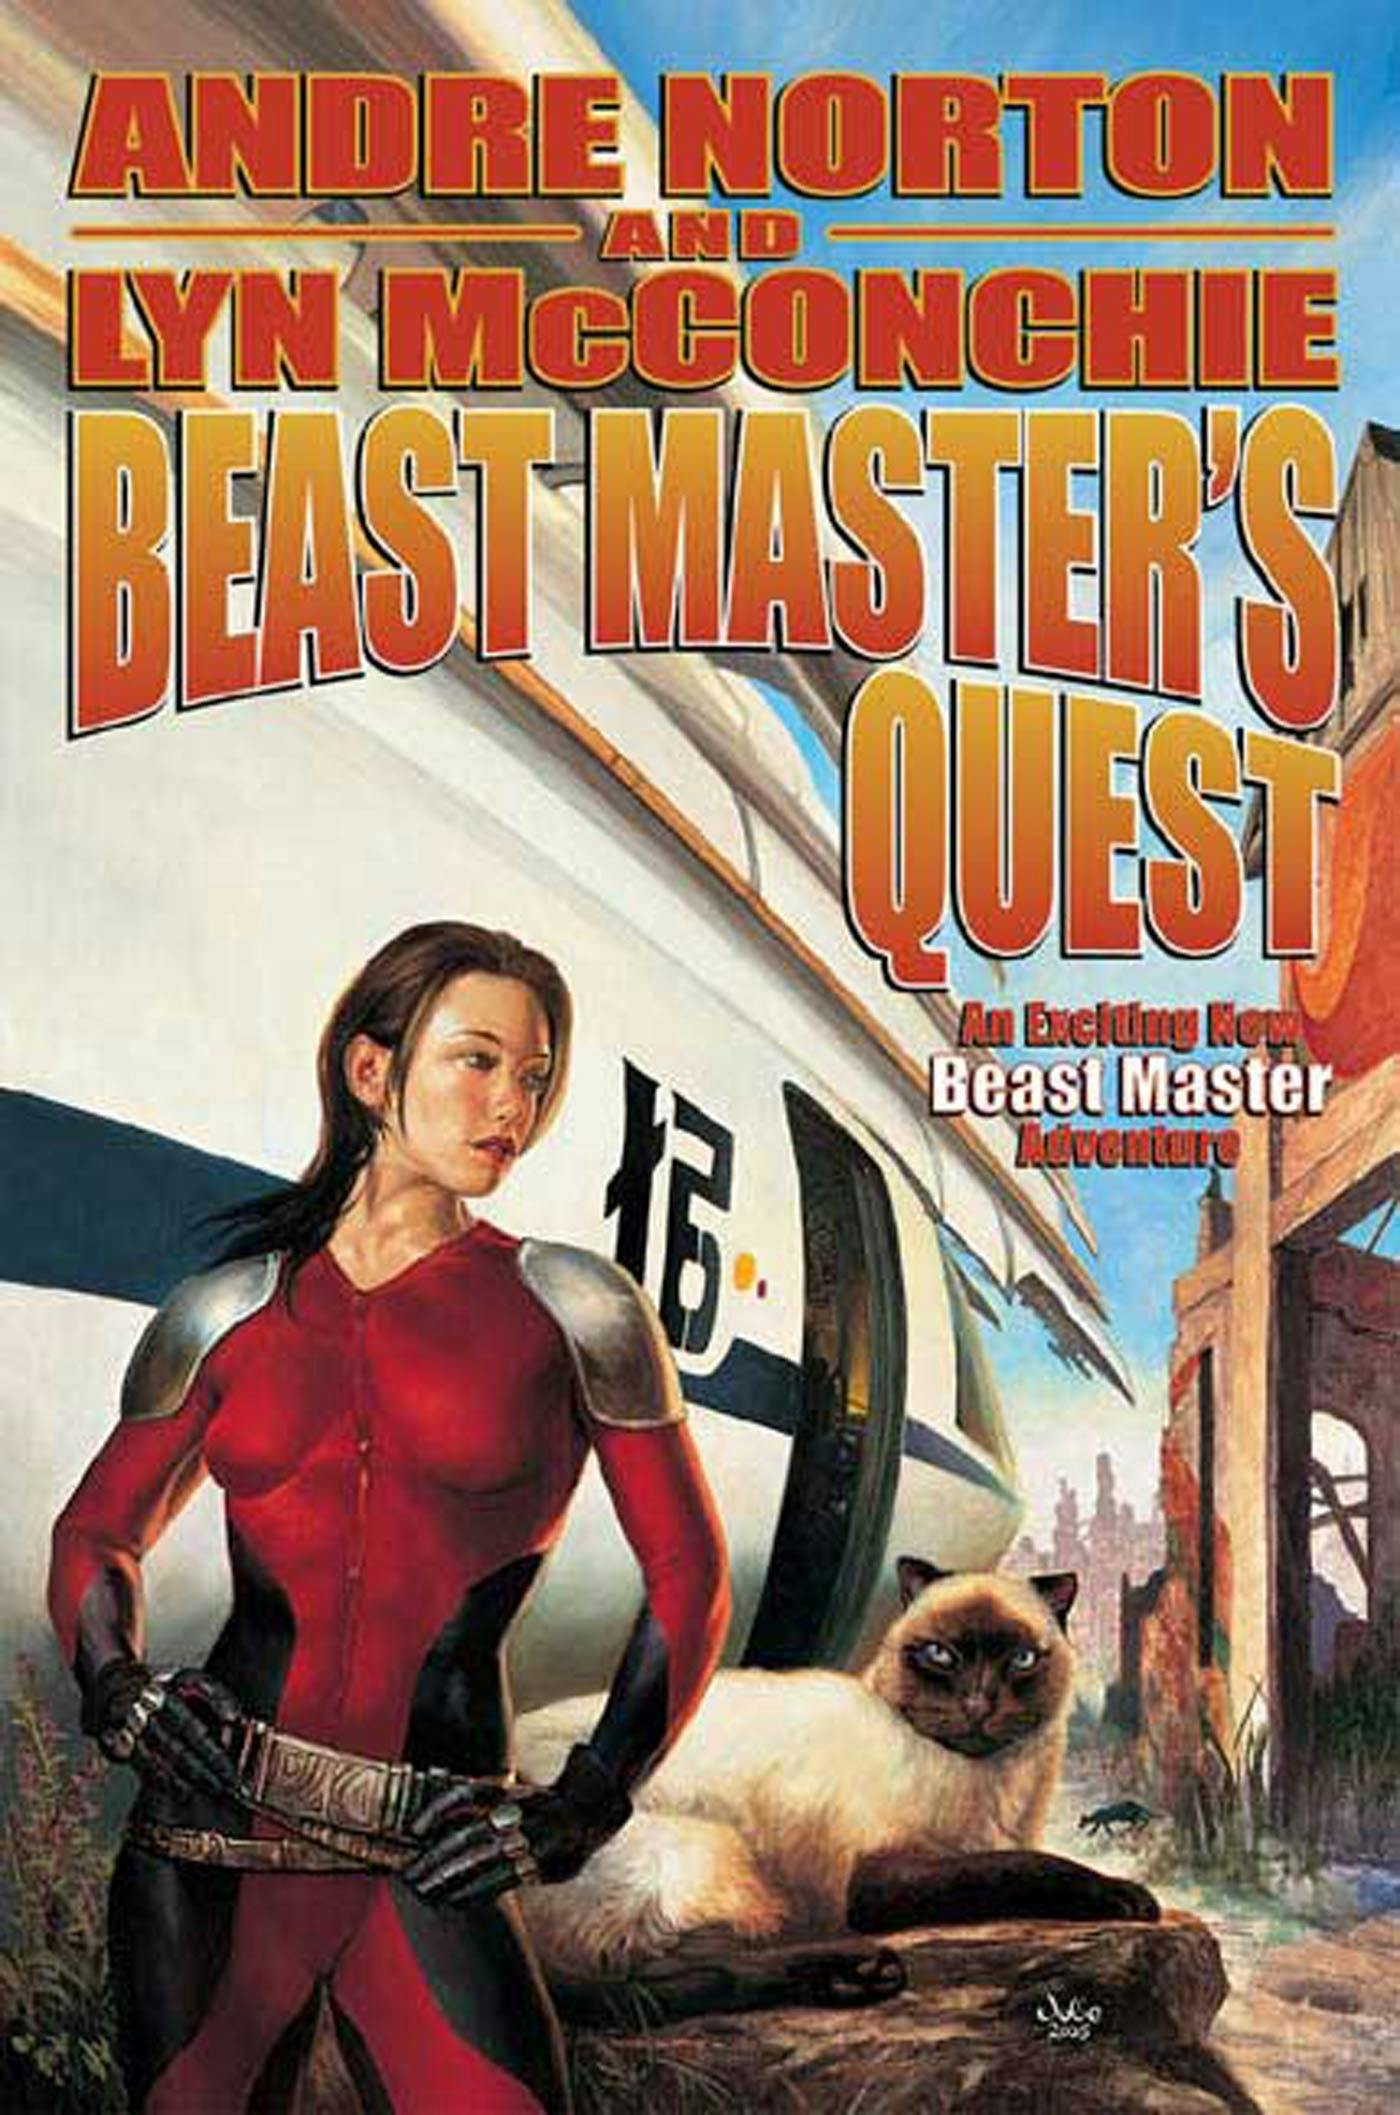 Cover for the book titled as: Beast Master's Quest